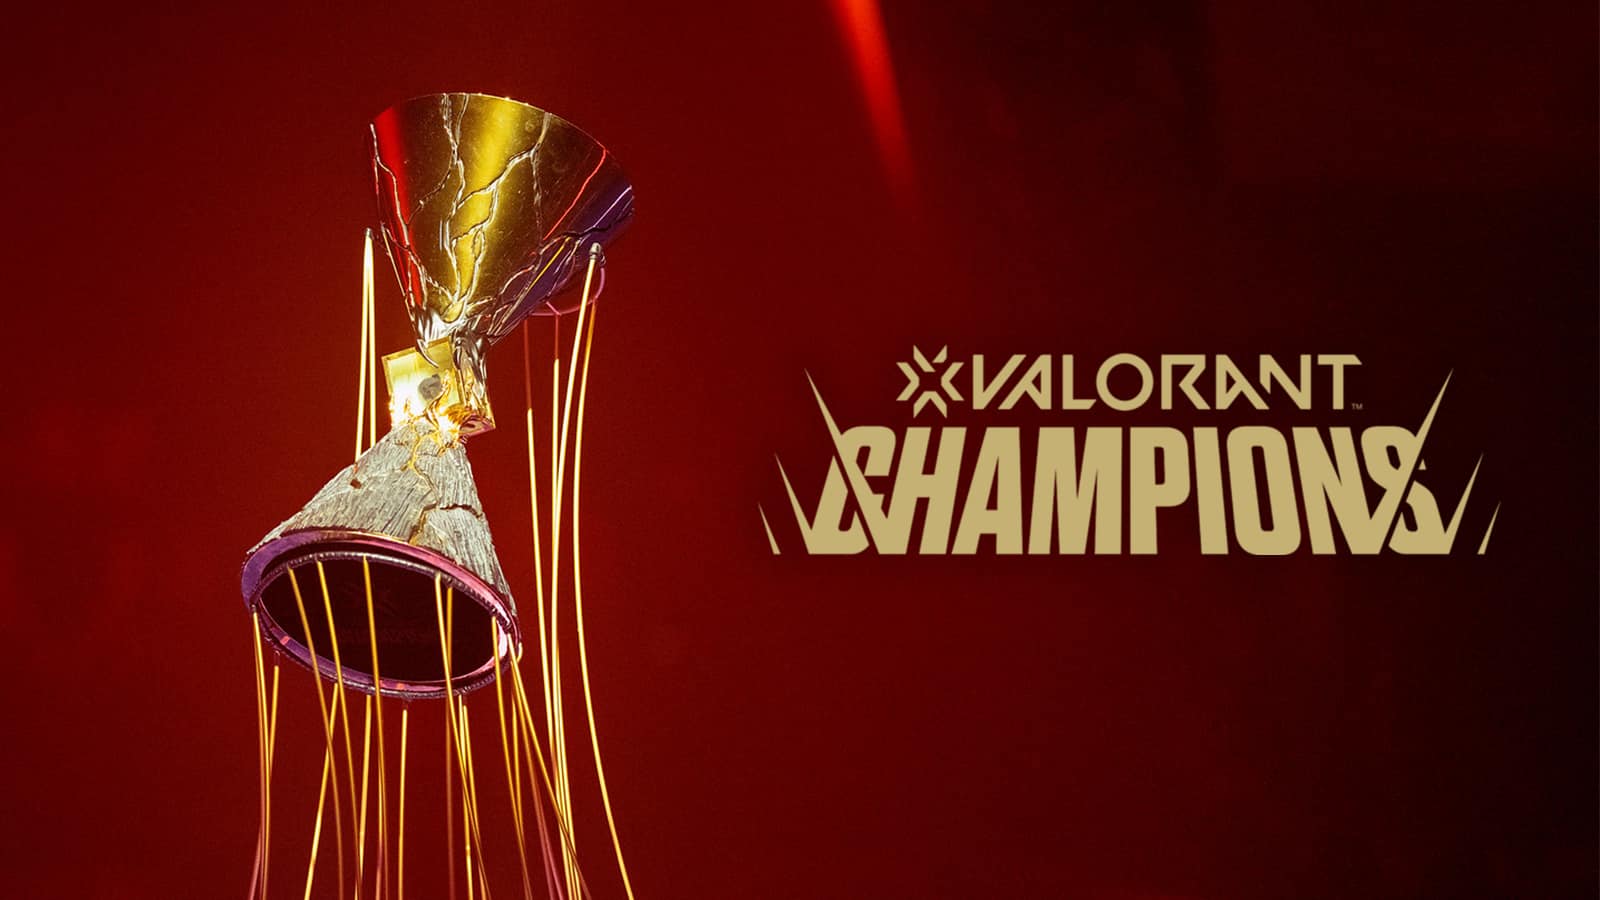 XSET Upsets FPX to qualify for Valorant Champions Playoffs